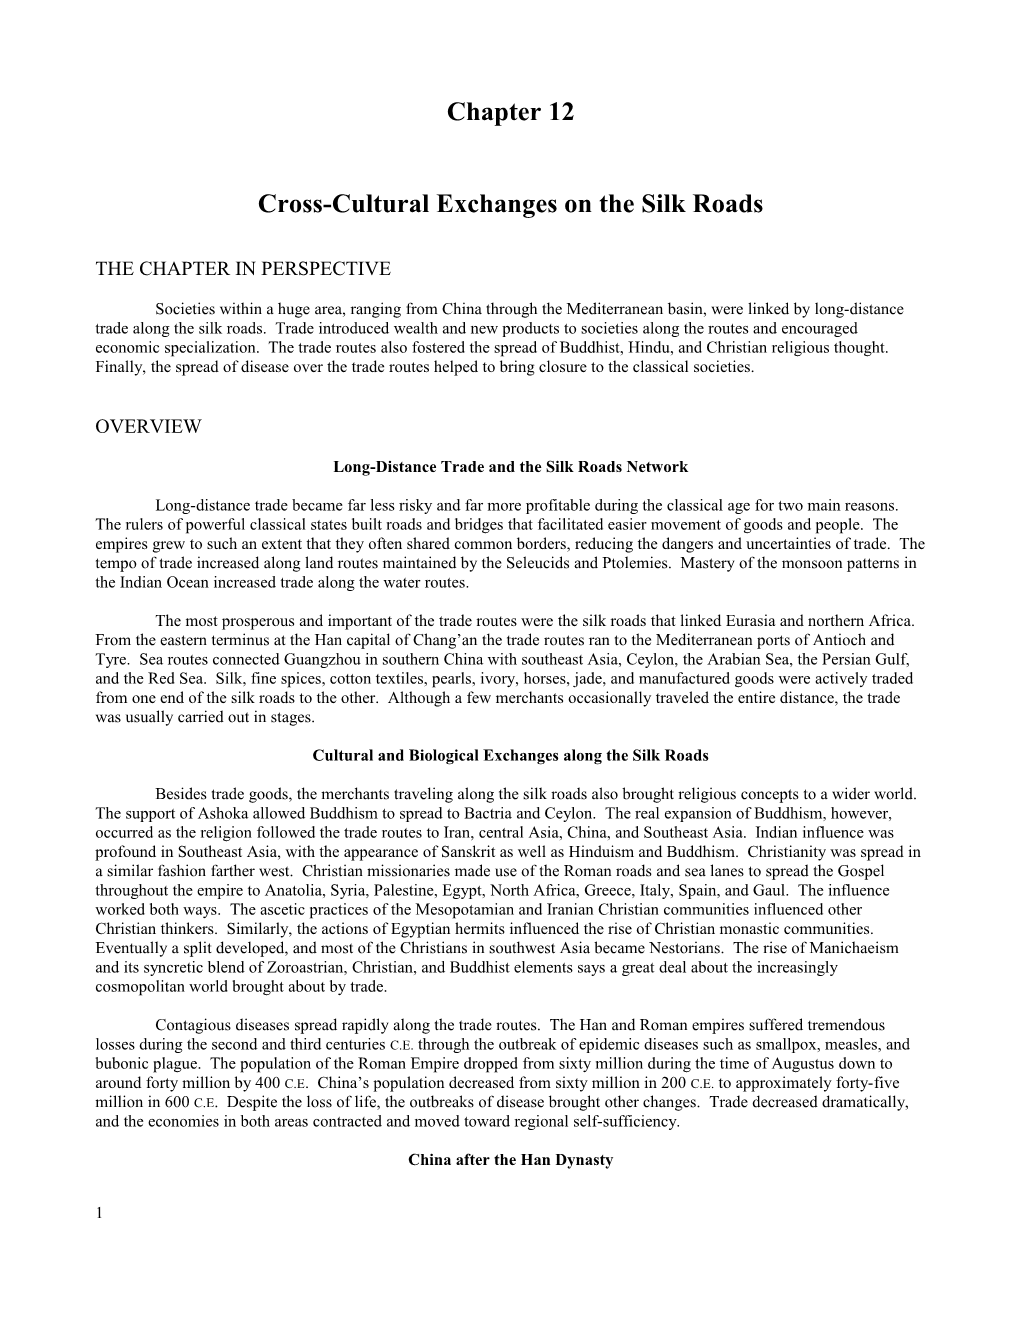 Cross-Cultural Exchanges on the Silk Roads